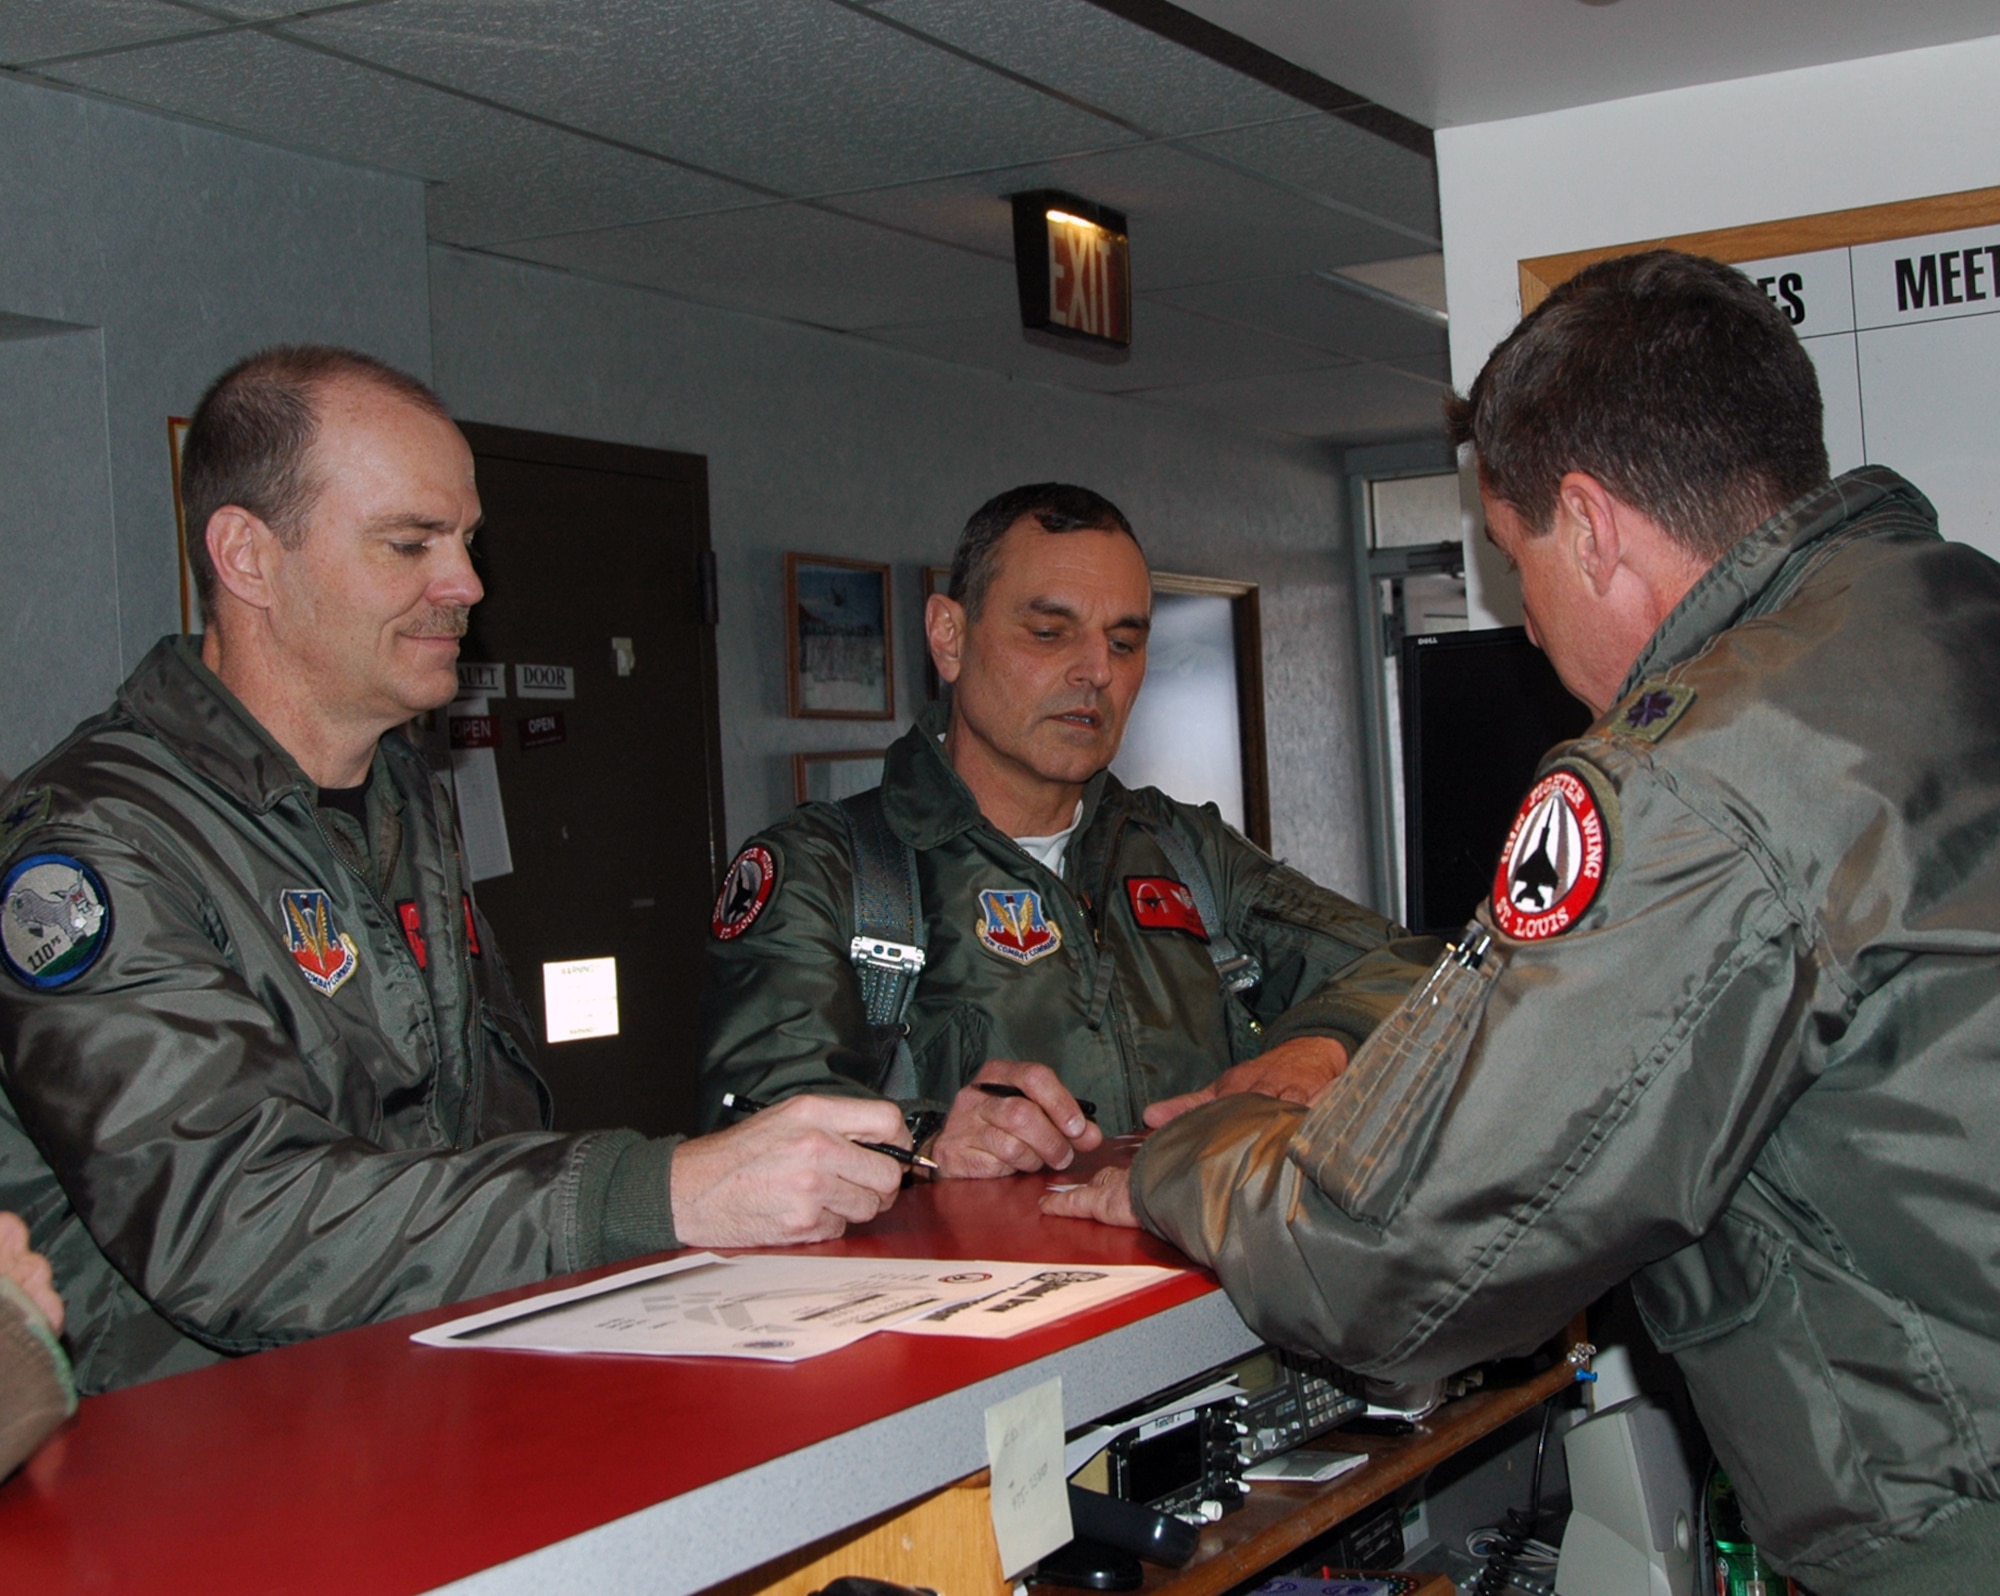 Col. Robert "Herm" Leeker, 131st Wing Commander and Col. Robert "Mos" Mohr receive pre-flight instructions from Lt. Col. Mike "Father" Flanagan prior to Leeker's final F-15 flight on Feb. 21 at Lambert International Airport. (Photo by MSgt. Mary-Dale Amison)